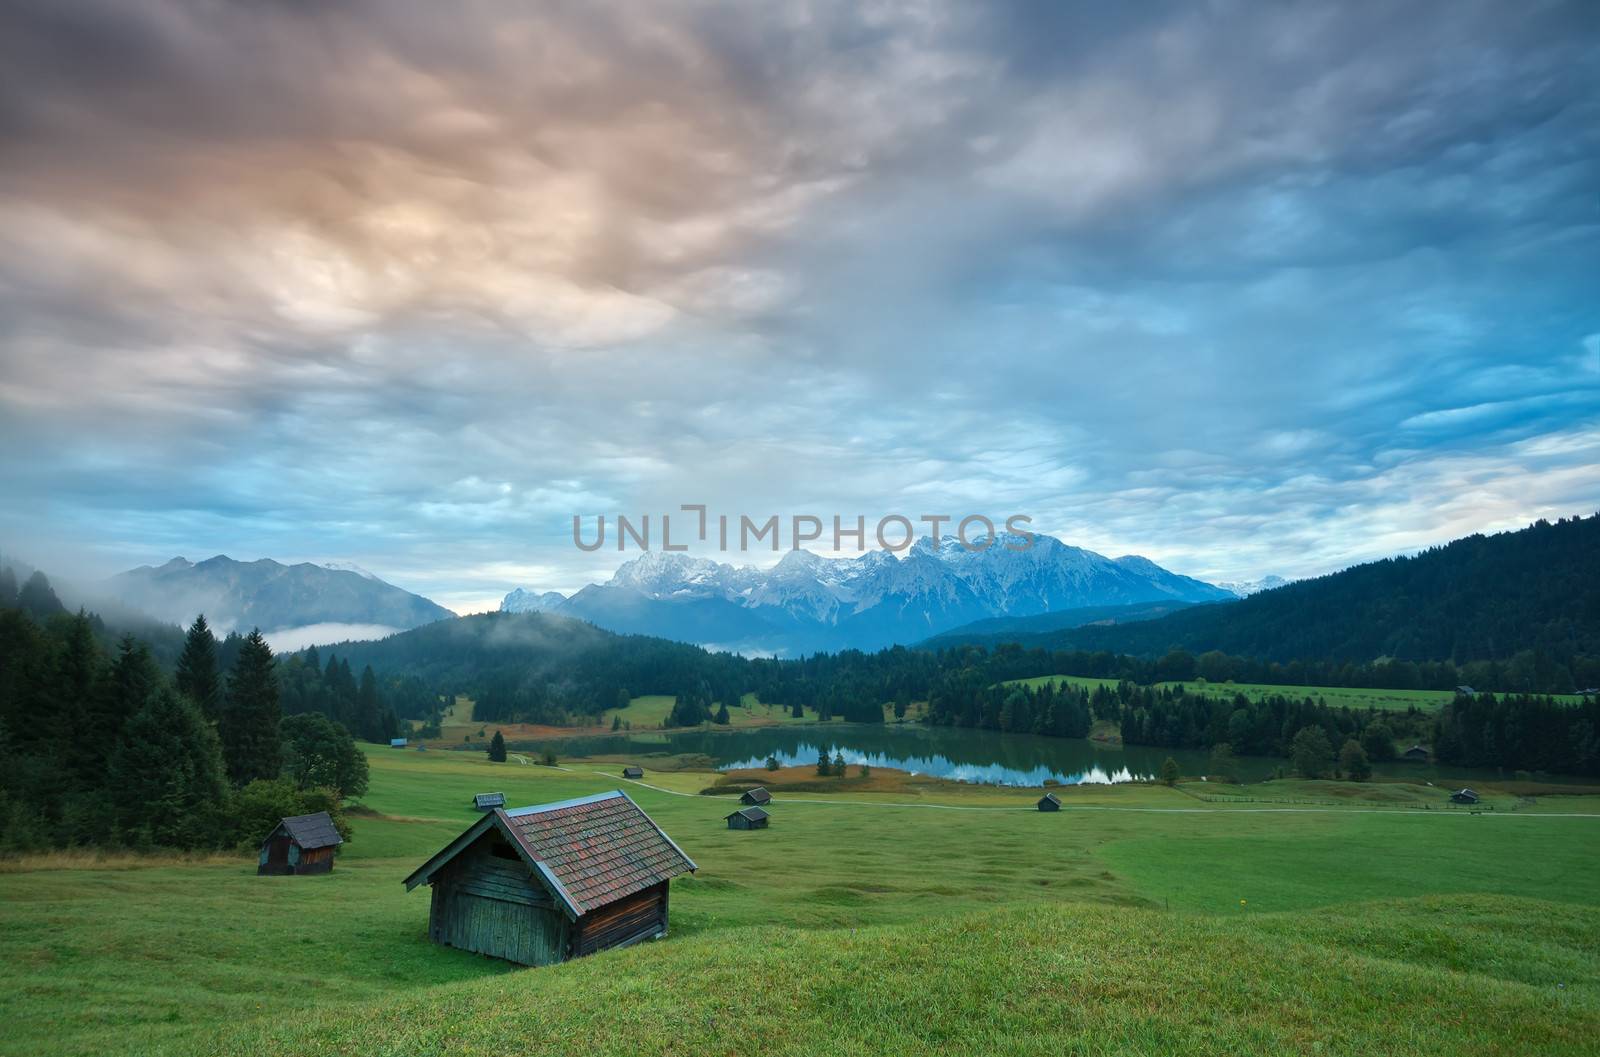 wooden hut o meadow by Geroldsee lake at sunrise by catolla